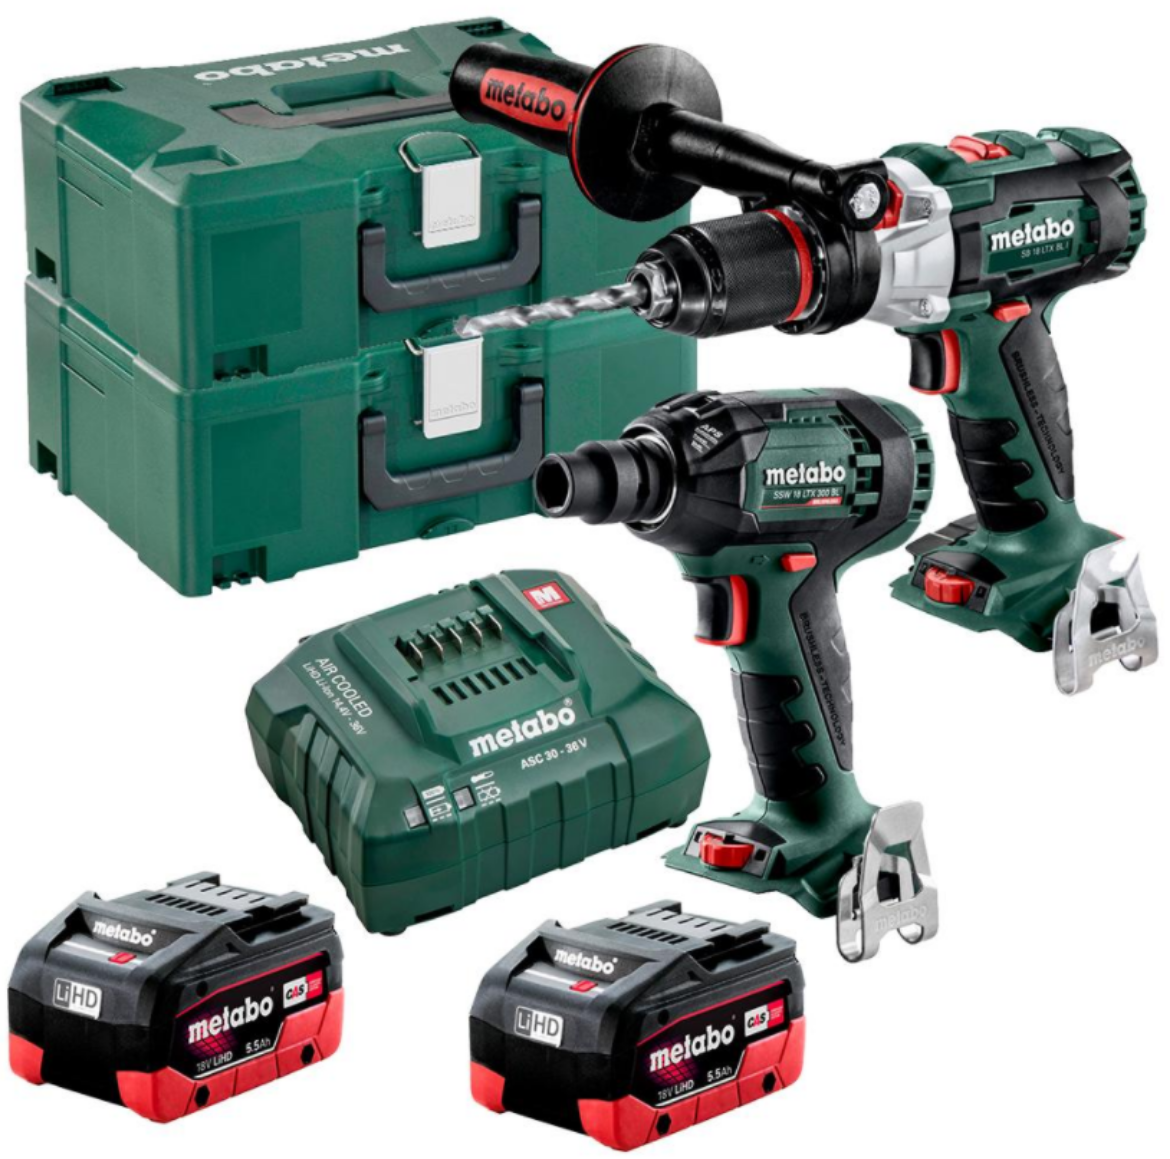 Picture of 18 V BRUSHLESS, HAMMER DRILL/SCREWDRIVER 120 NM +
18 V BRUSHLESS 1/2 IMPACT WRENCH 300 NM
(2 x 5.5 AH LIHD BATTERY PACKS, ASC 55 V AIR-COOLED CHARGER, 2 x METALOC II CASES)